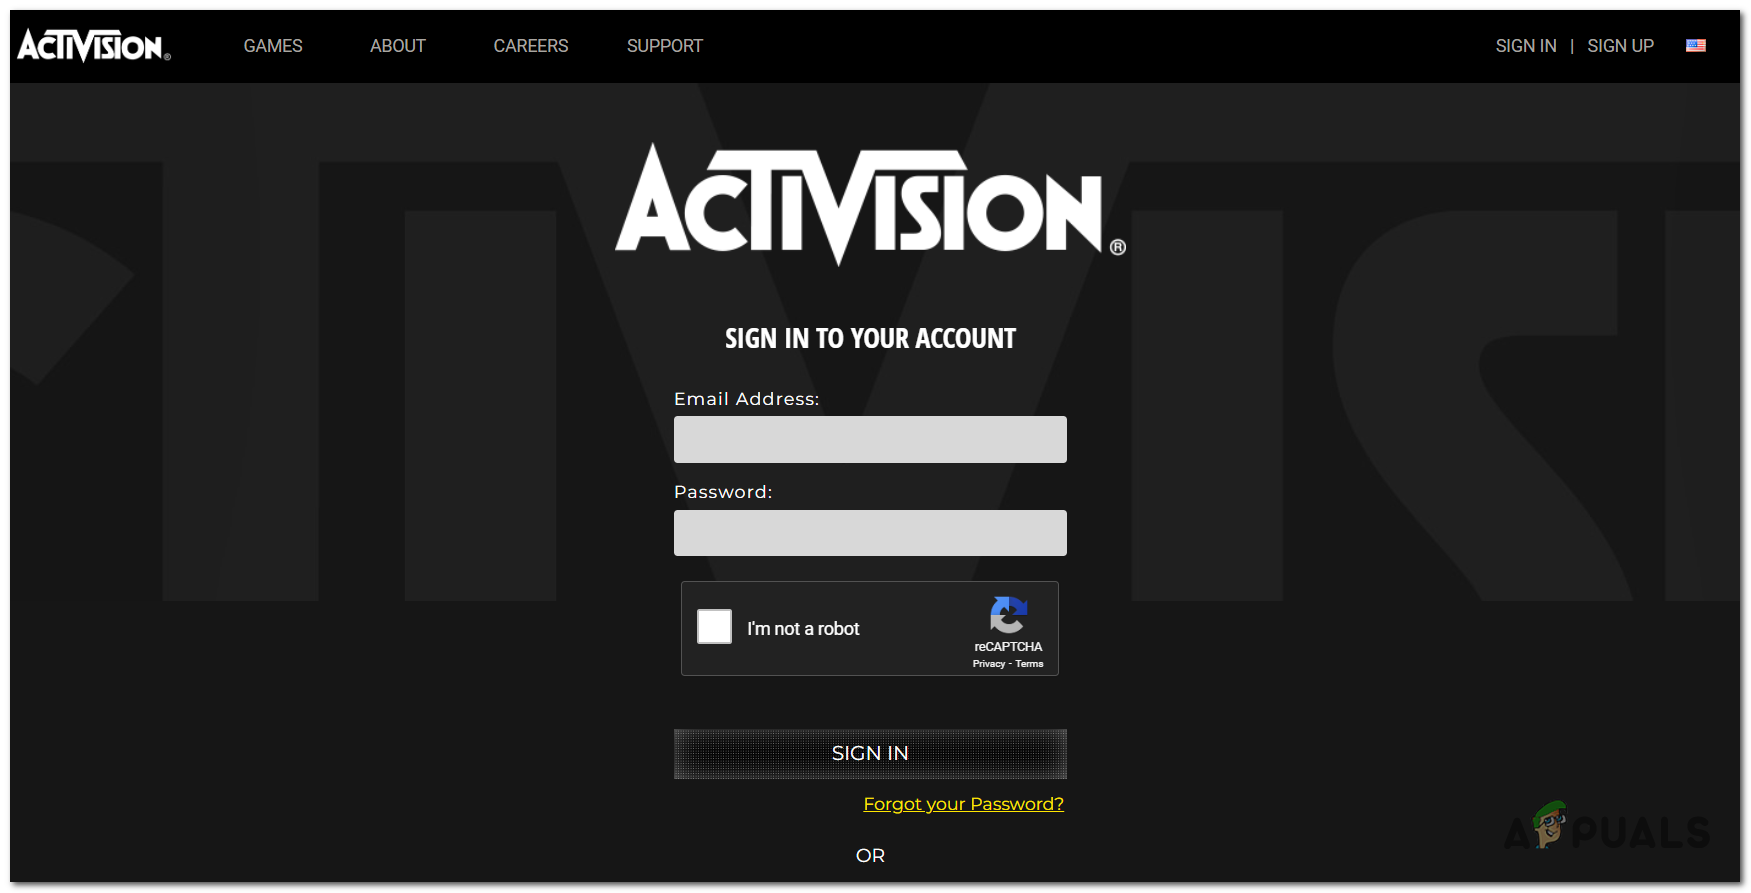 Logging in to your Activision account